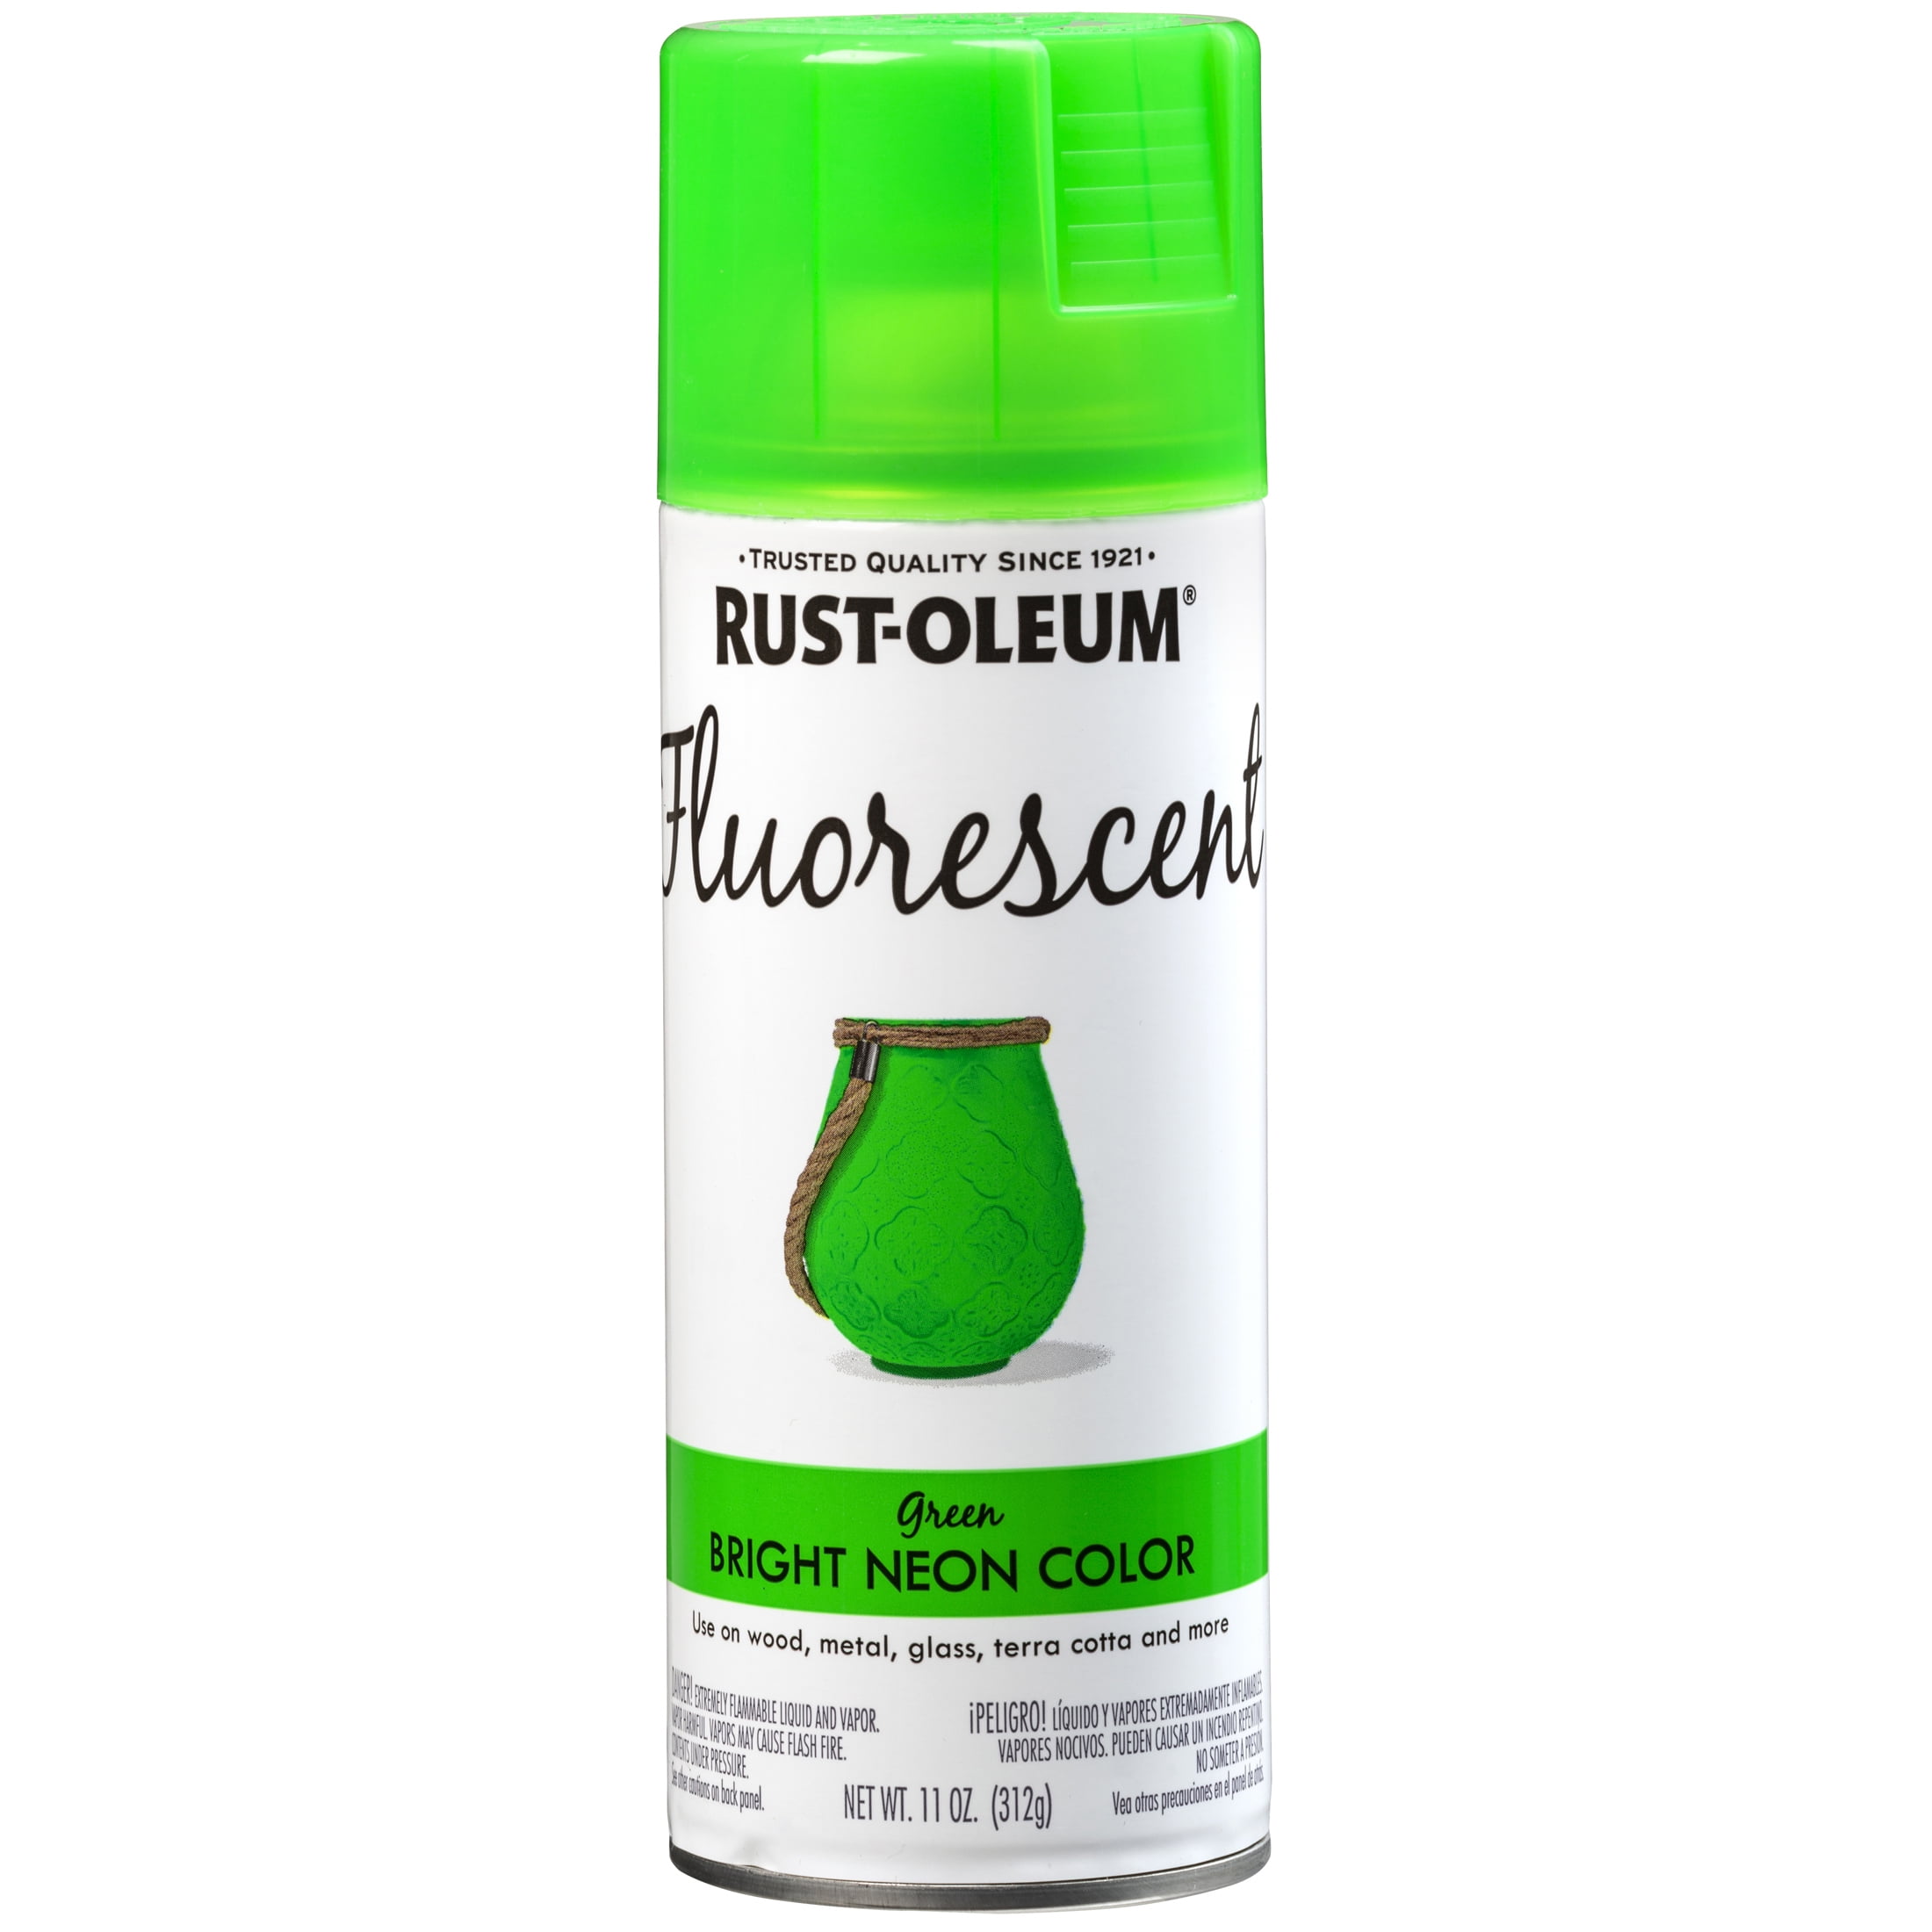 Premium Decor Fluorescent Spray Paint, Glo Green - Midwest Technology  Products